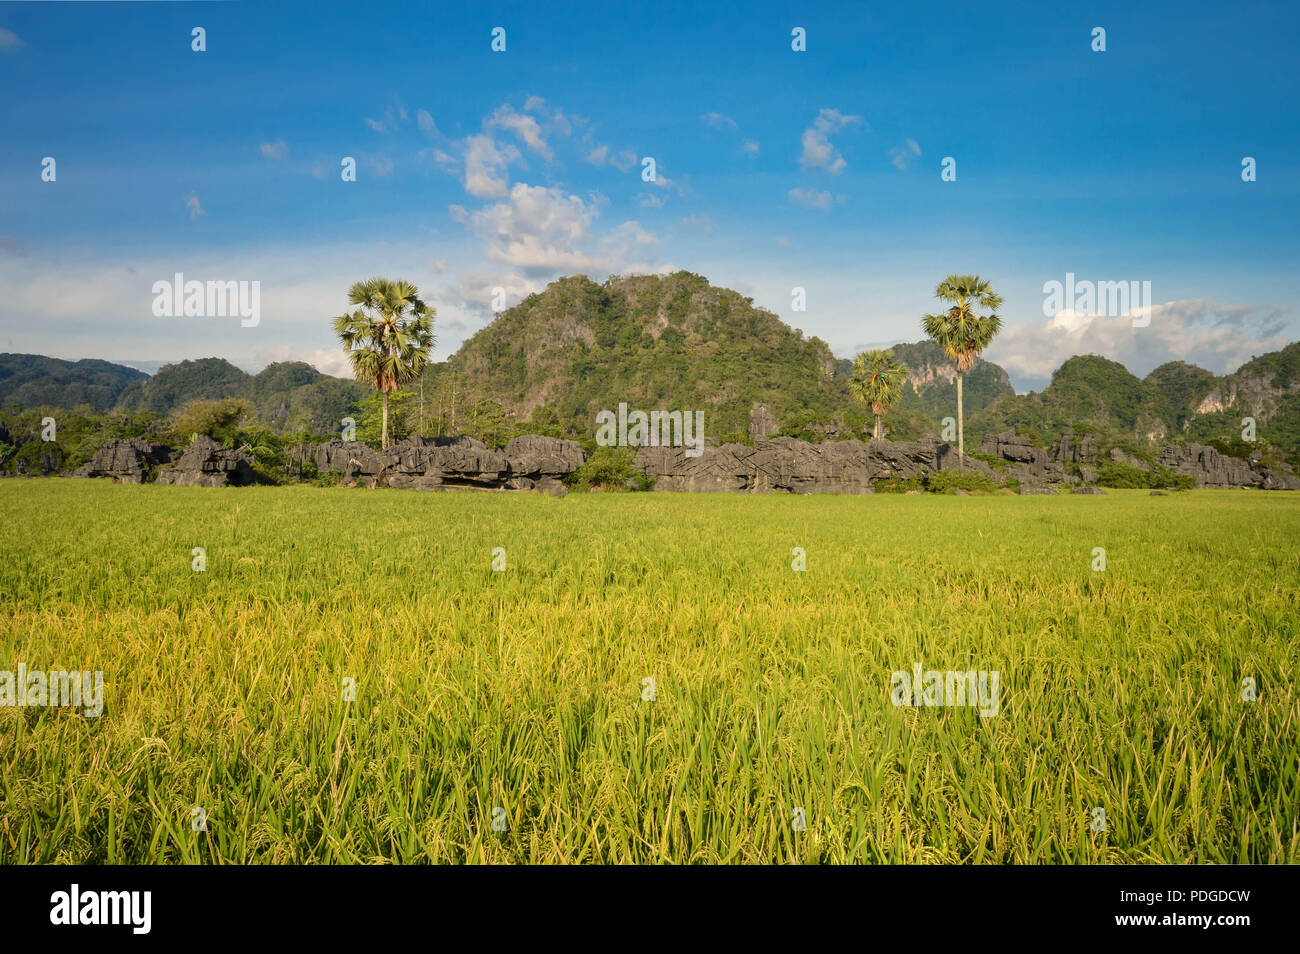 Beautiful stone forest knows as karsts set amid rice fields in Rammang-Rammang park near Makassar, South Sulawesi, Indonesia Stock Photo